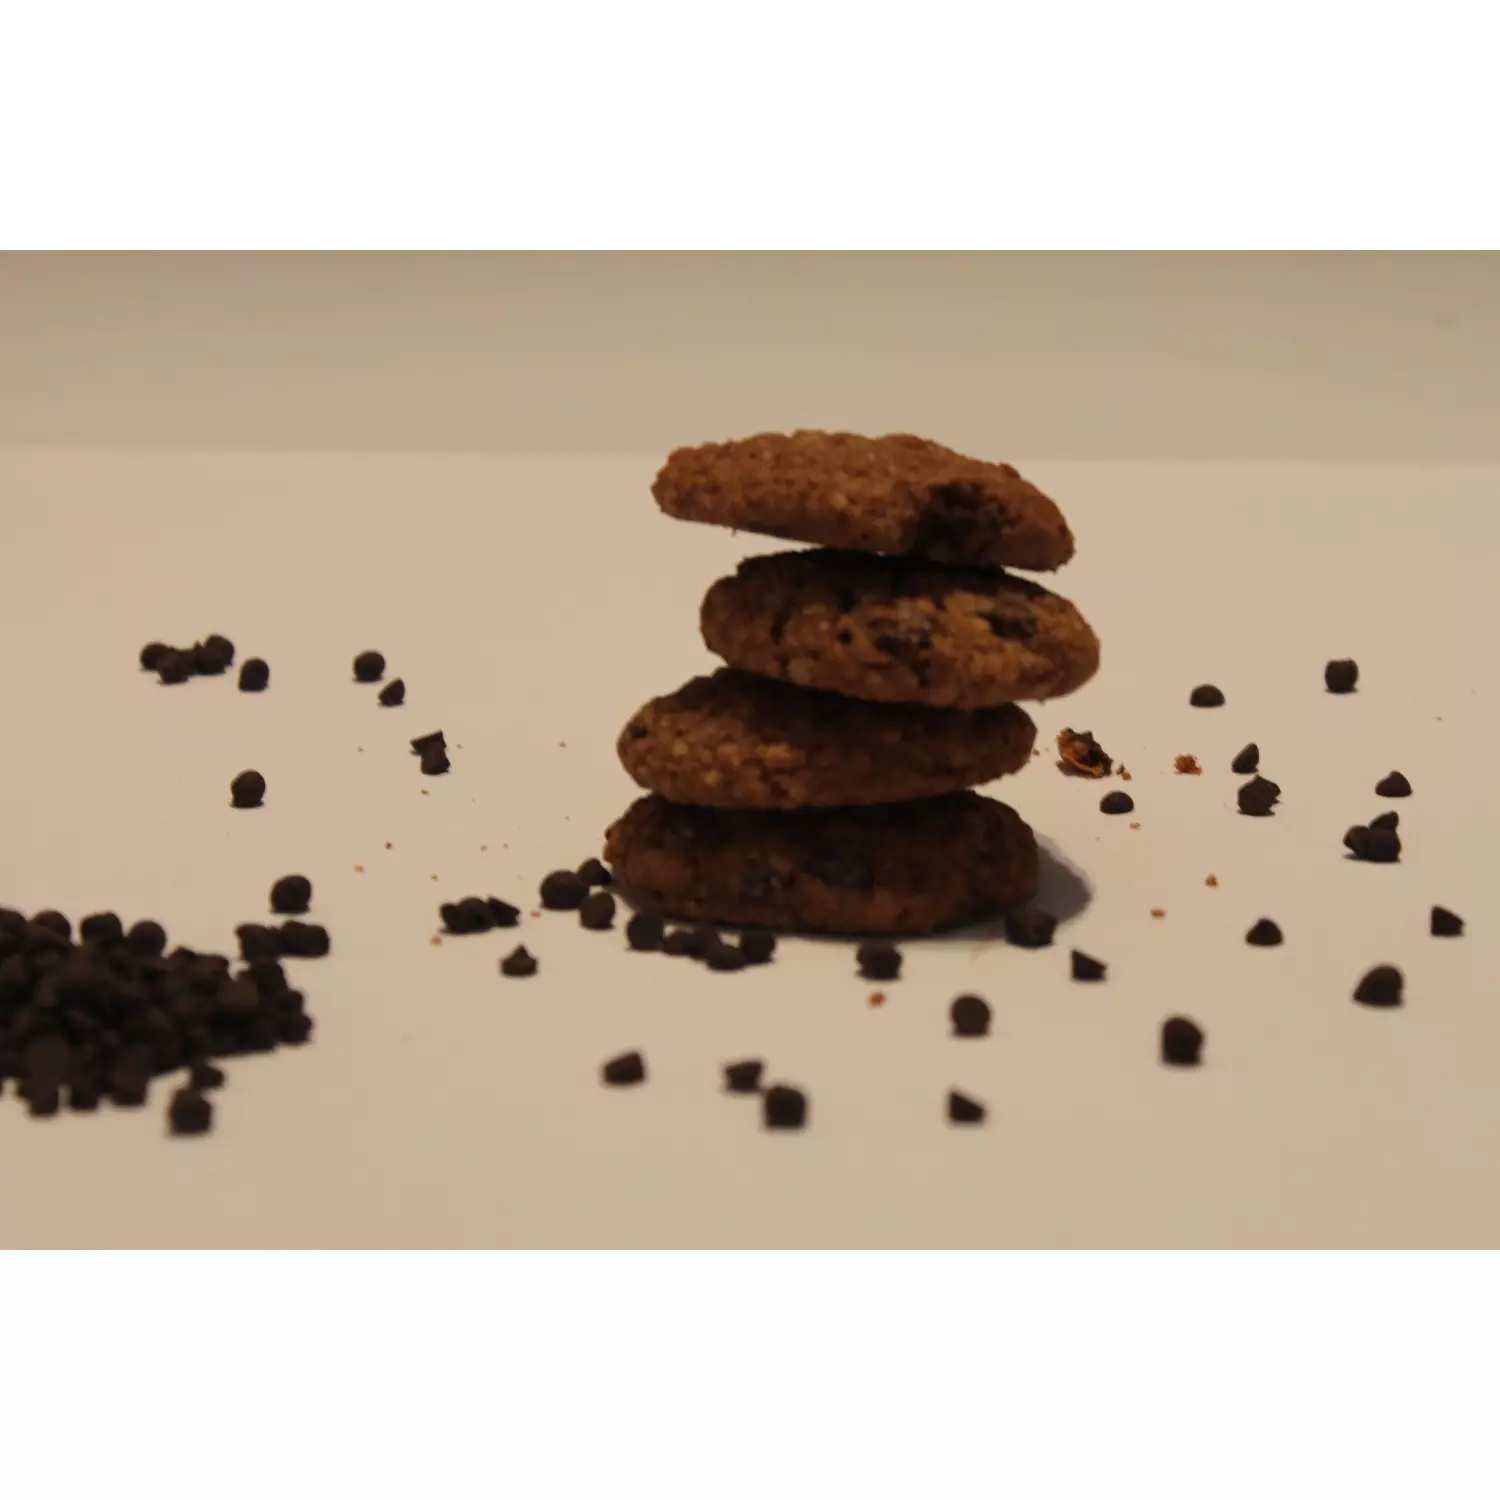 Oatmeal Choco Chip Cookies hover image